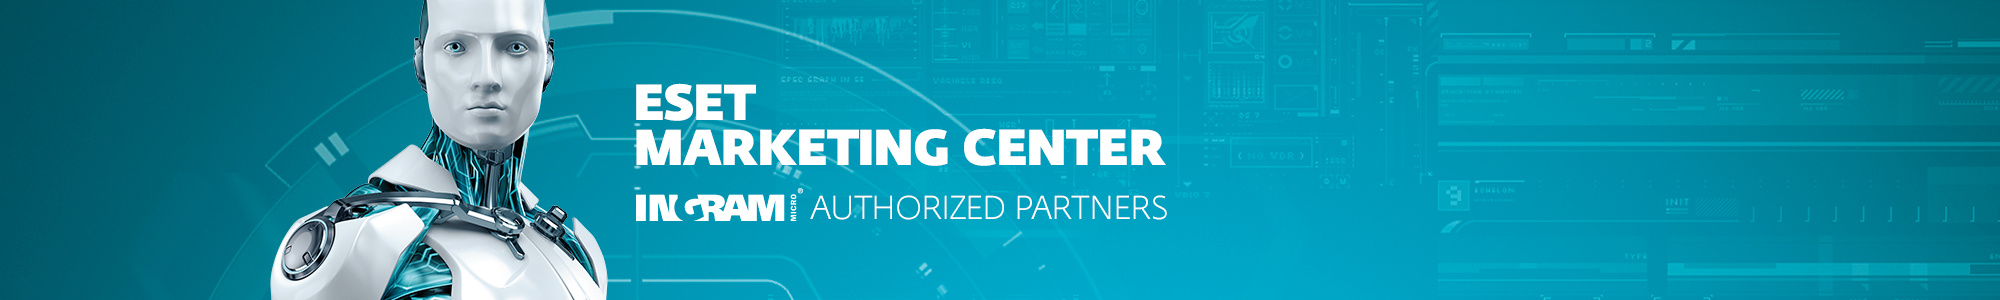 Welcome to the  ESET Marketing Center!,